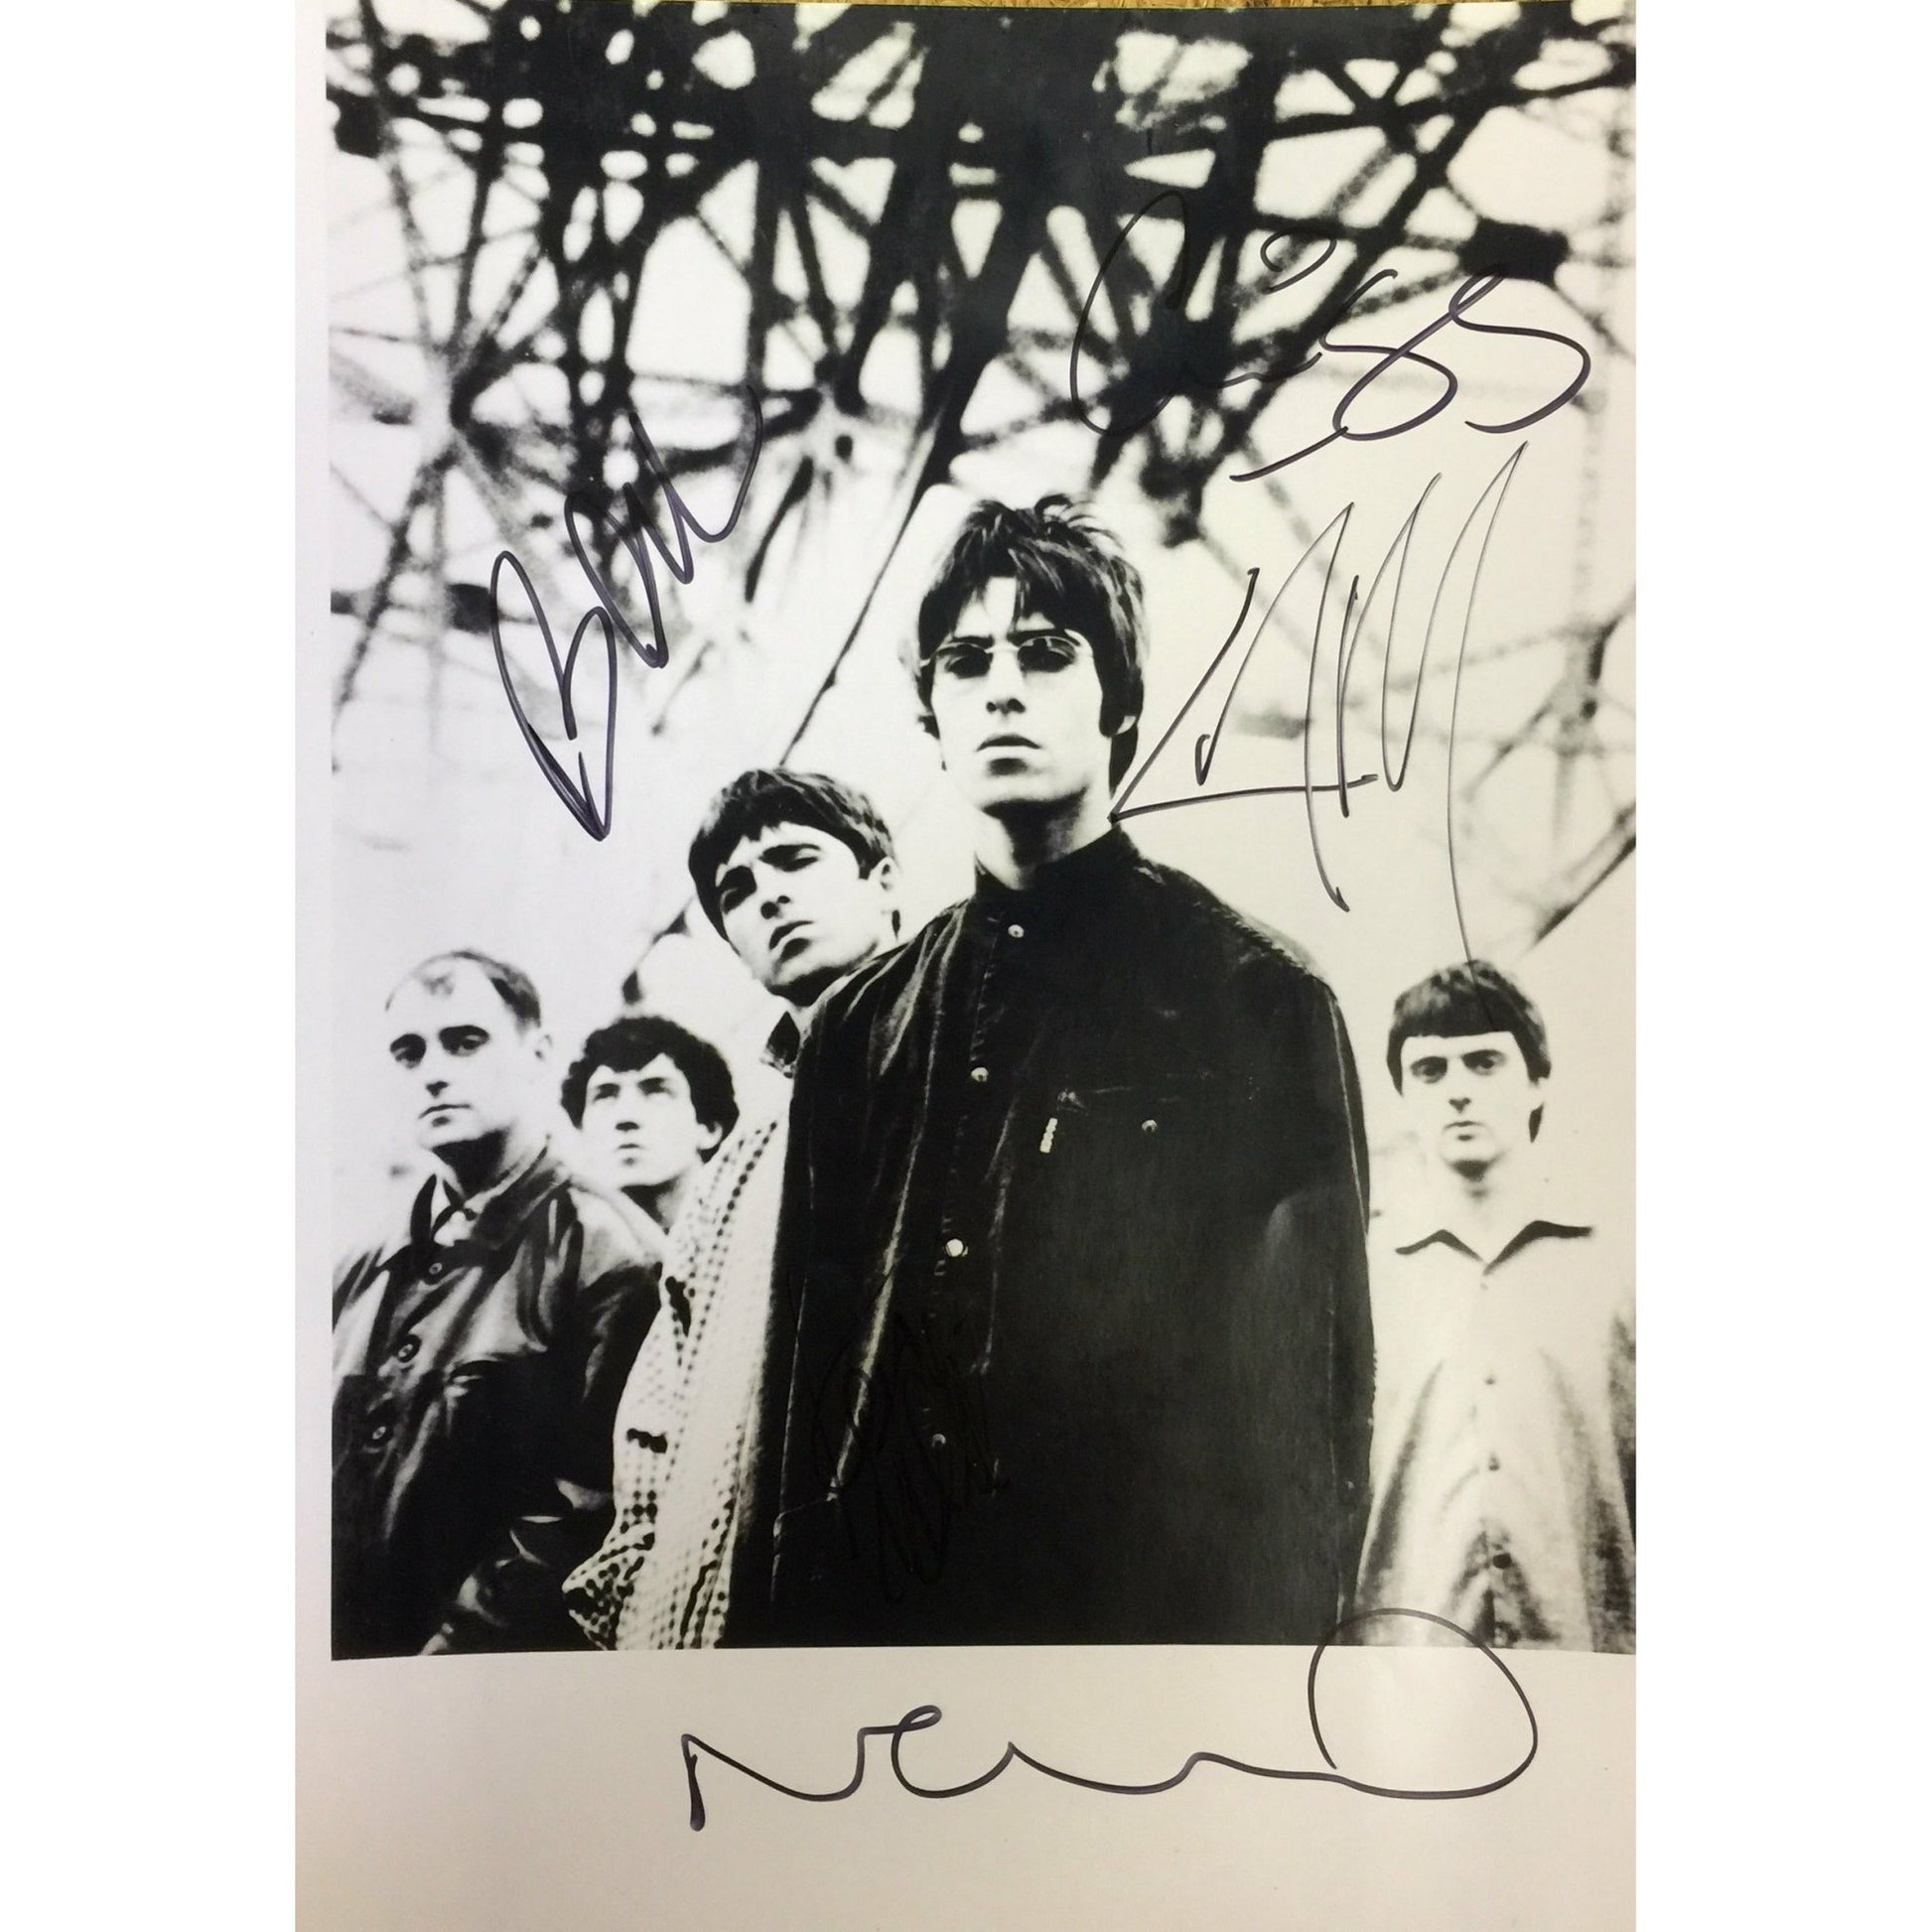 Oasis first line up autographed promotional photograph - The Memorabilia Club